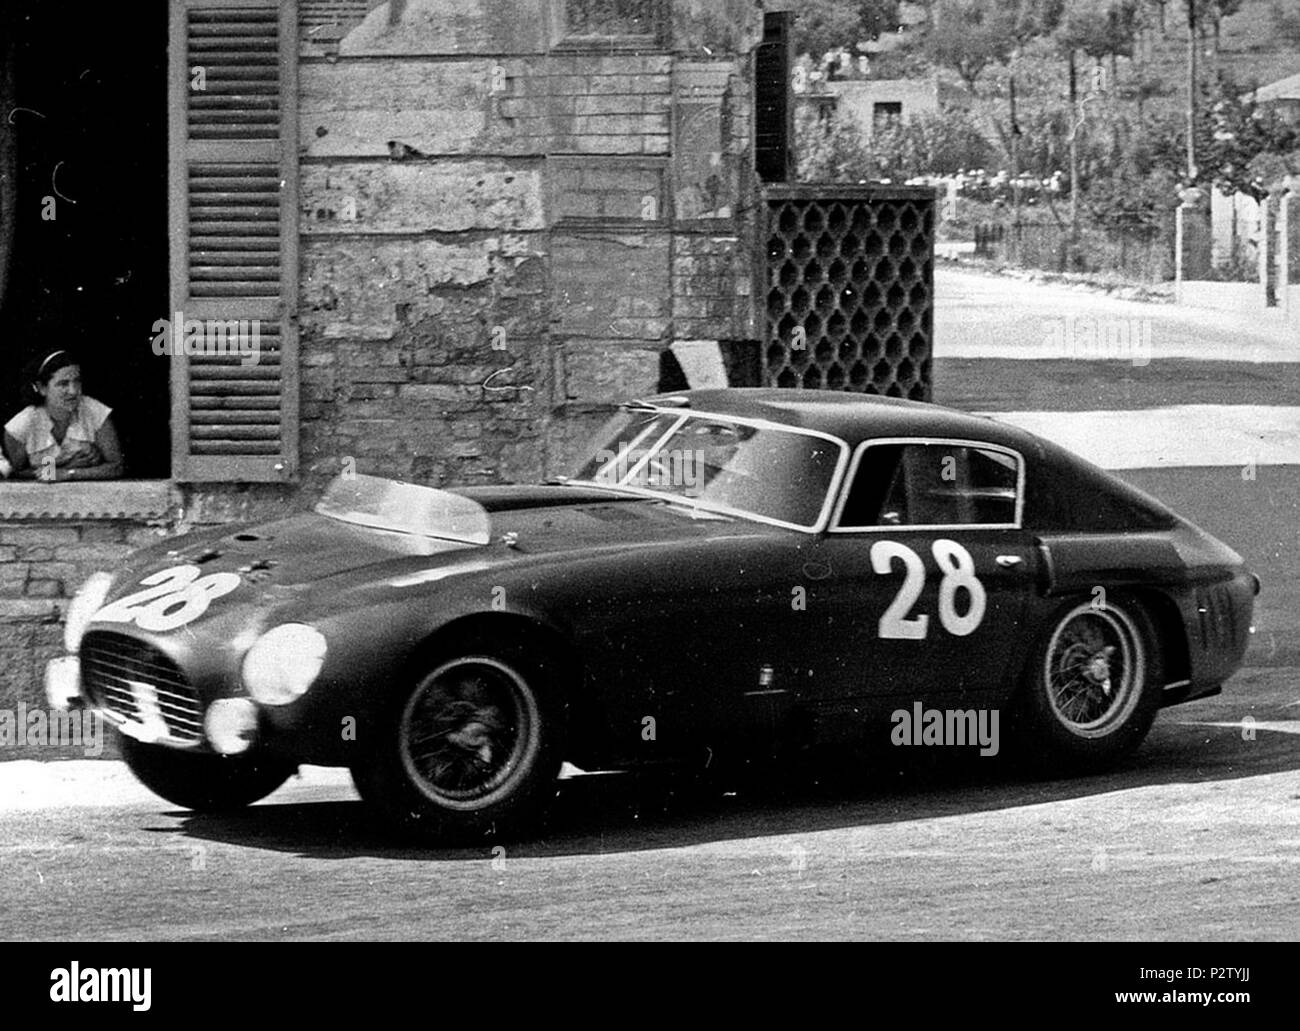 . English: Ferrari 340/375 MM at the 2nd Pescara GP on Aug 16, 1953; starting #28, drivers Mike Hawthorn and Umberto Maglioli. And they won this race. This is chassis #0320AM.[1] . 16 August 1953. Unknown photographer 28 Ferrari-340-375-mm-berlinetta-competizione-by-pinin-farina 0320AM 0-100 75-Pescara1953b Stock Photo